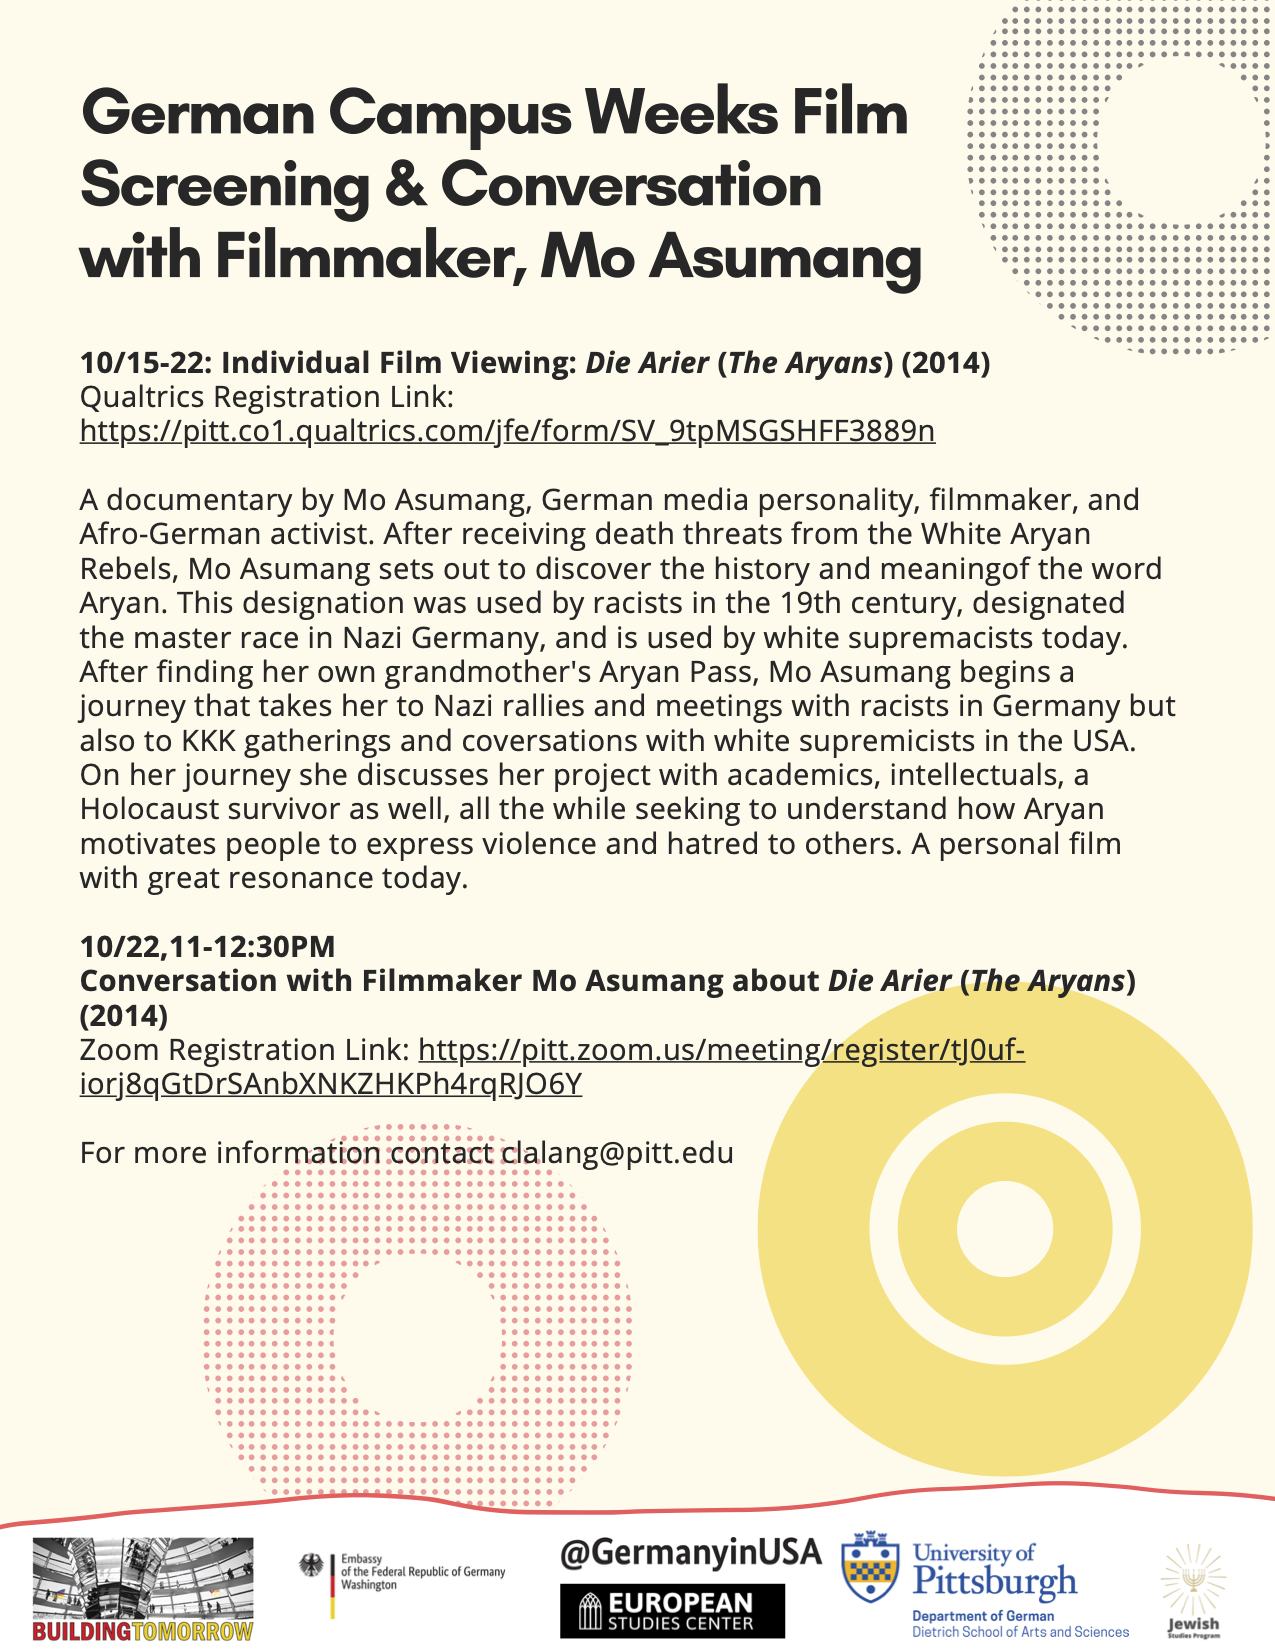 This poster described the Film Event with filmmaker Mo Asumang, which is in interactive pdf form in a link.